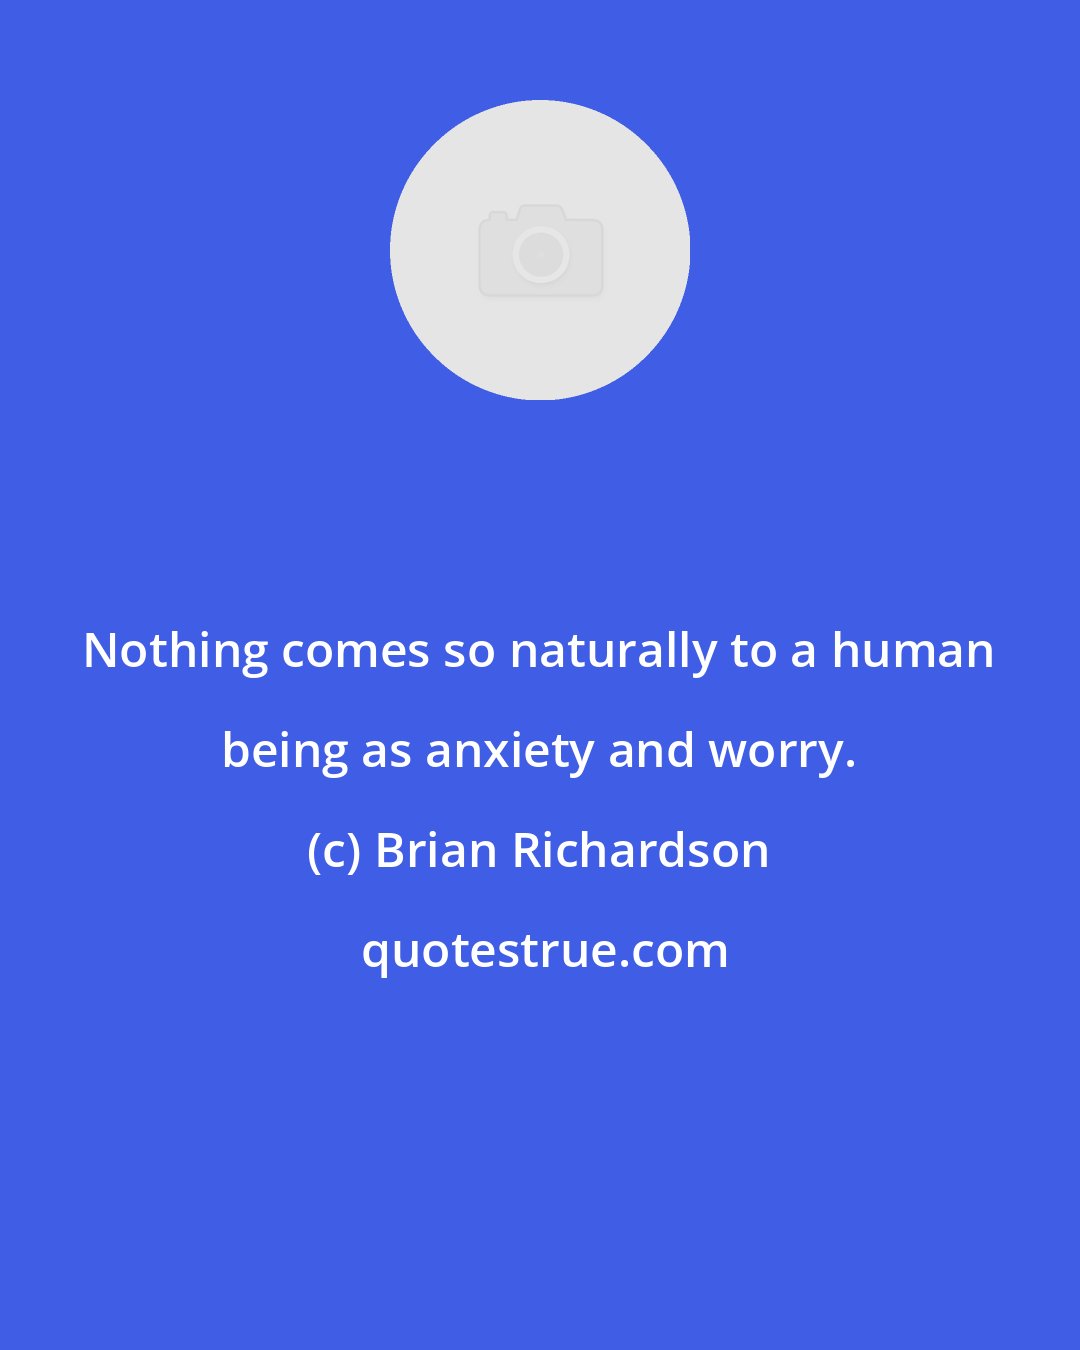 Brian Richardson: Nothing comes so naturally to a human being as anxiety and worry.